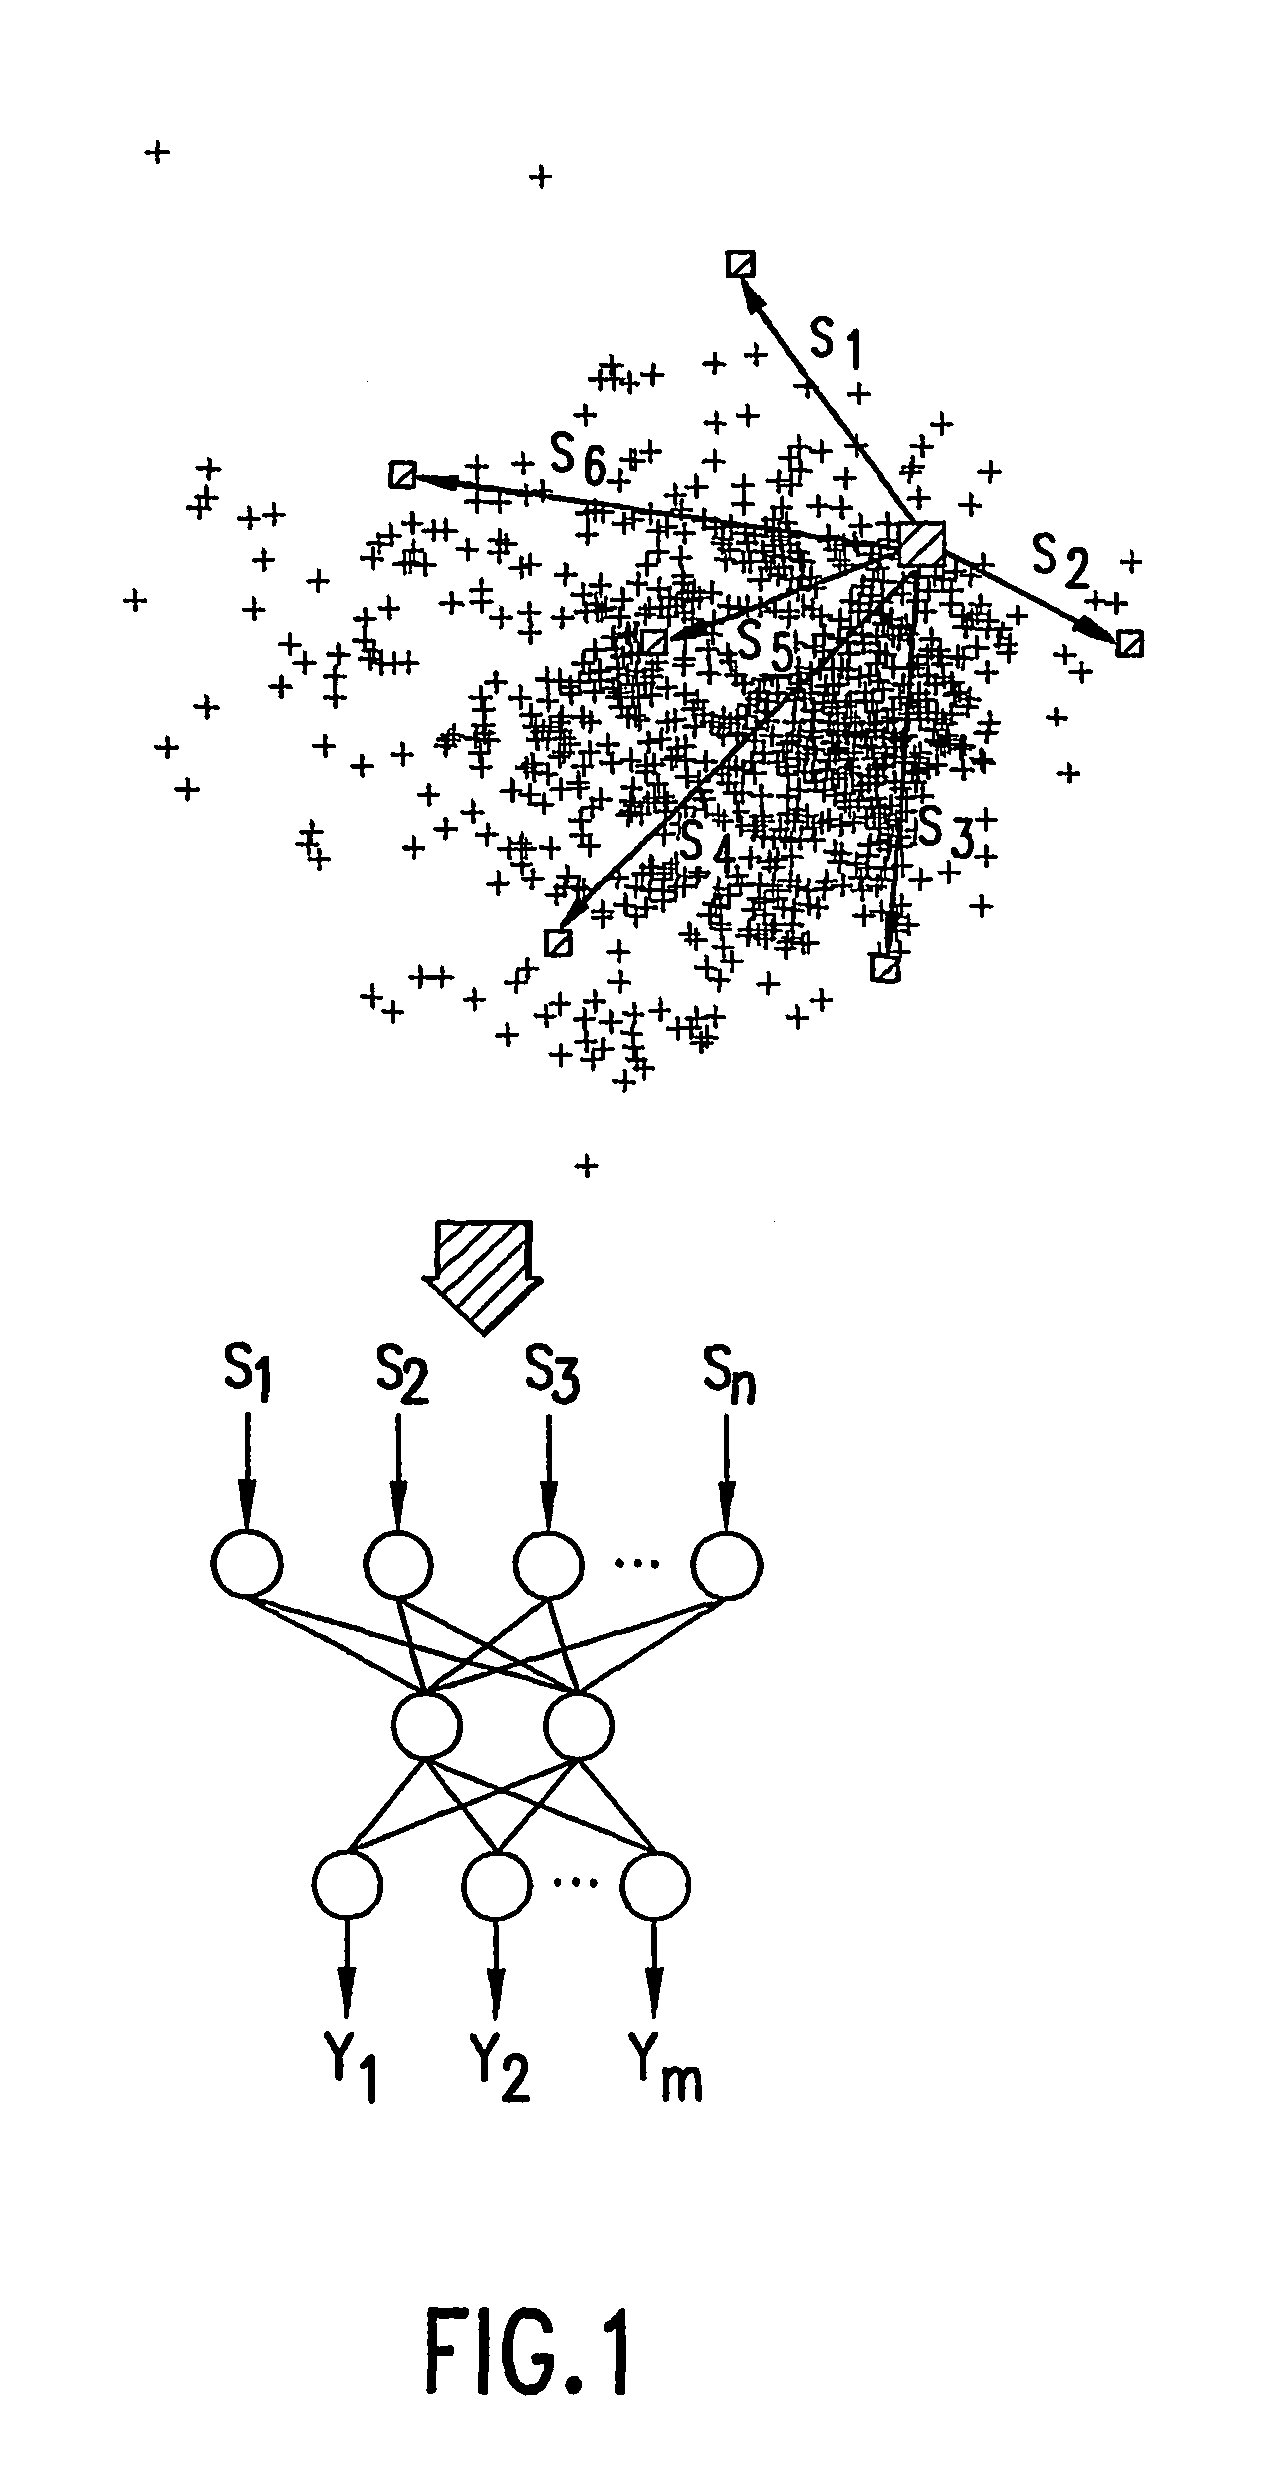 Method, system, and computer program product for representing object relationships in a multidimensional space